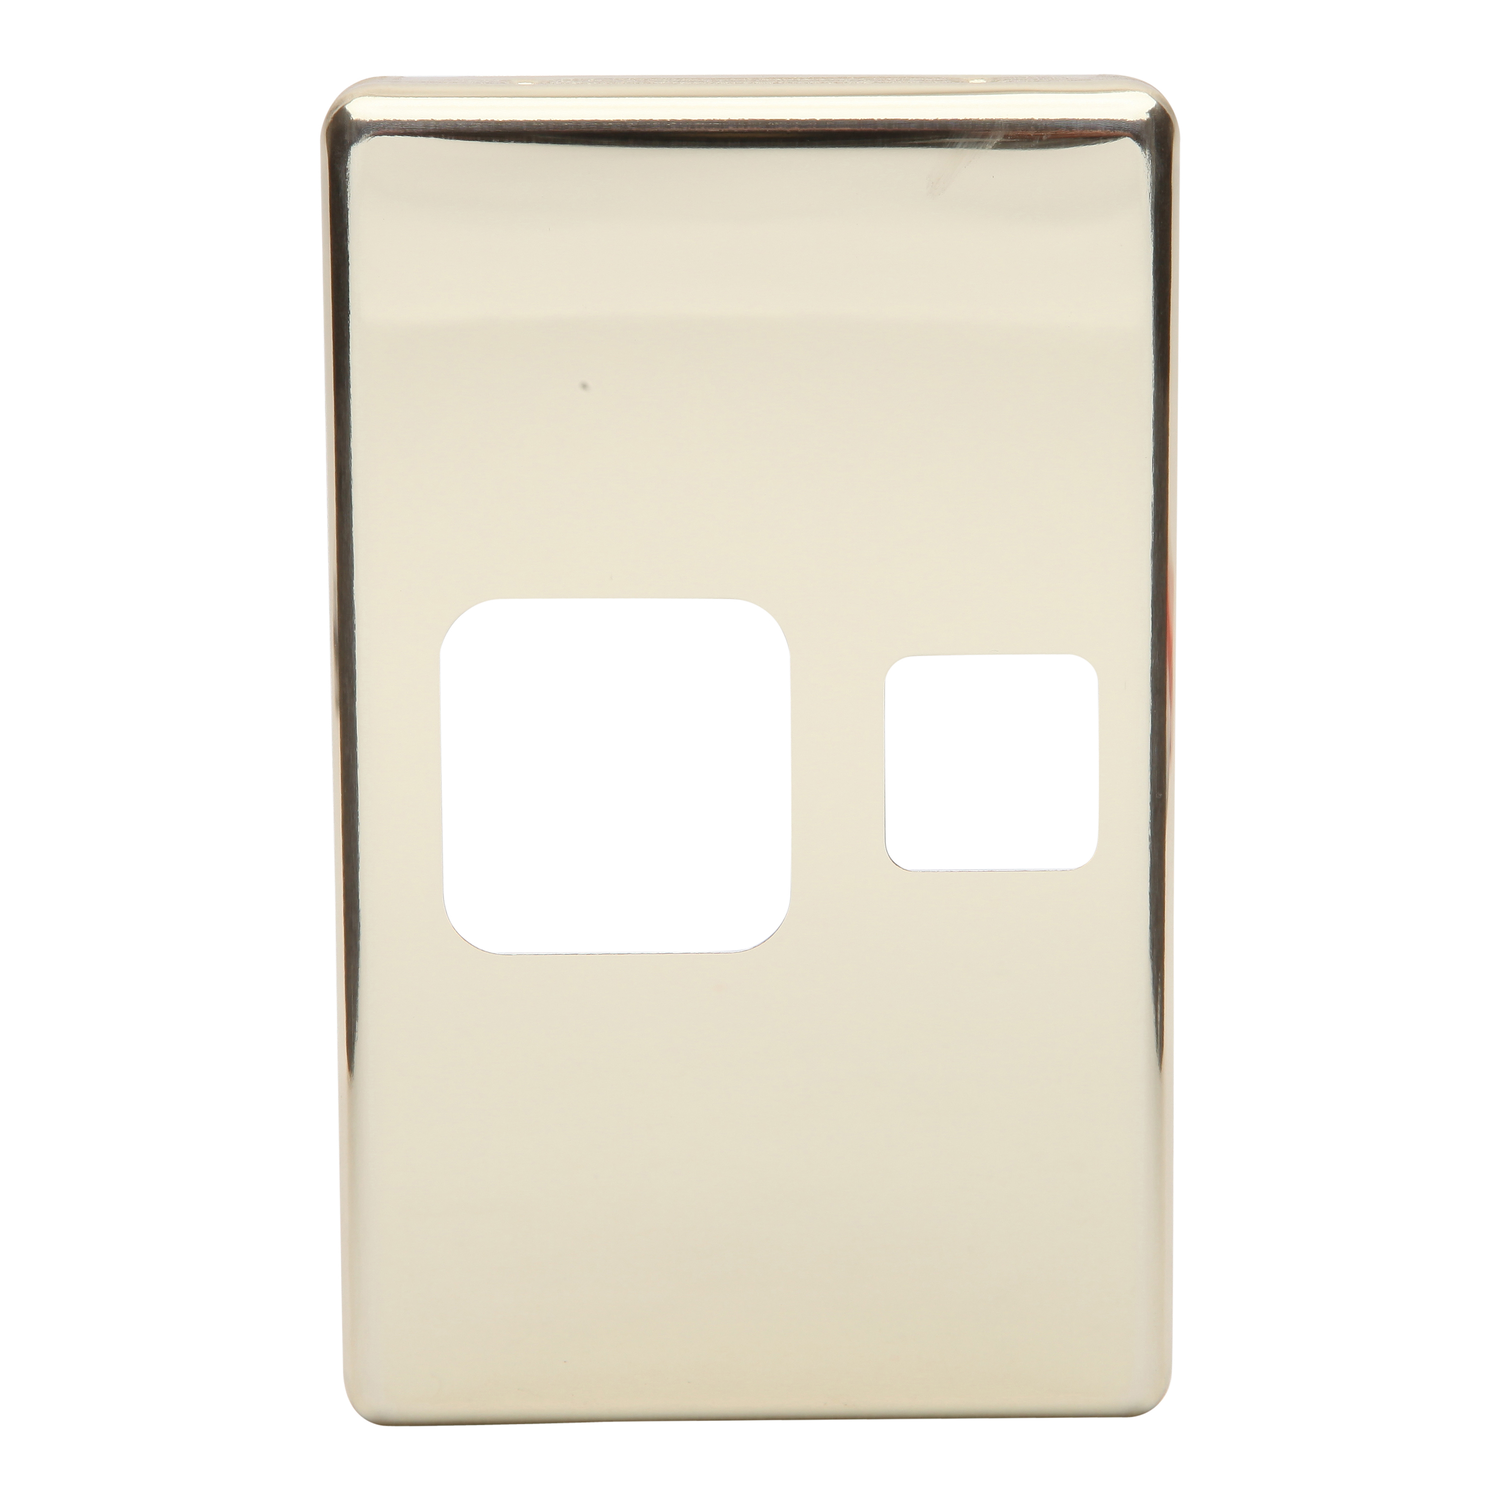 Clip-On Socket Cover Plate For Vertical Single Switch Socket, Polished Brass